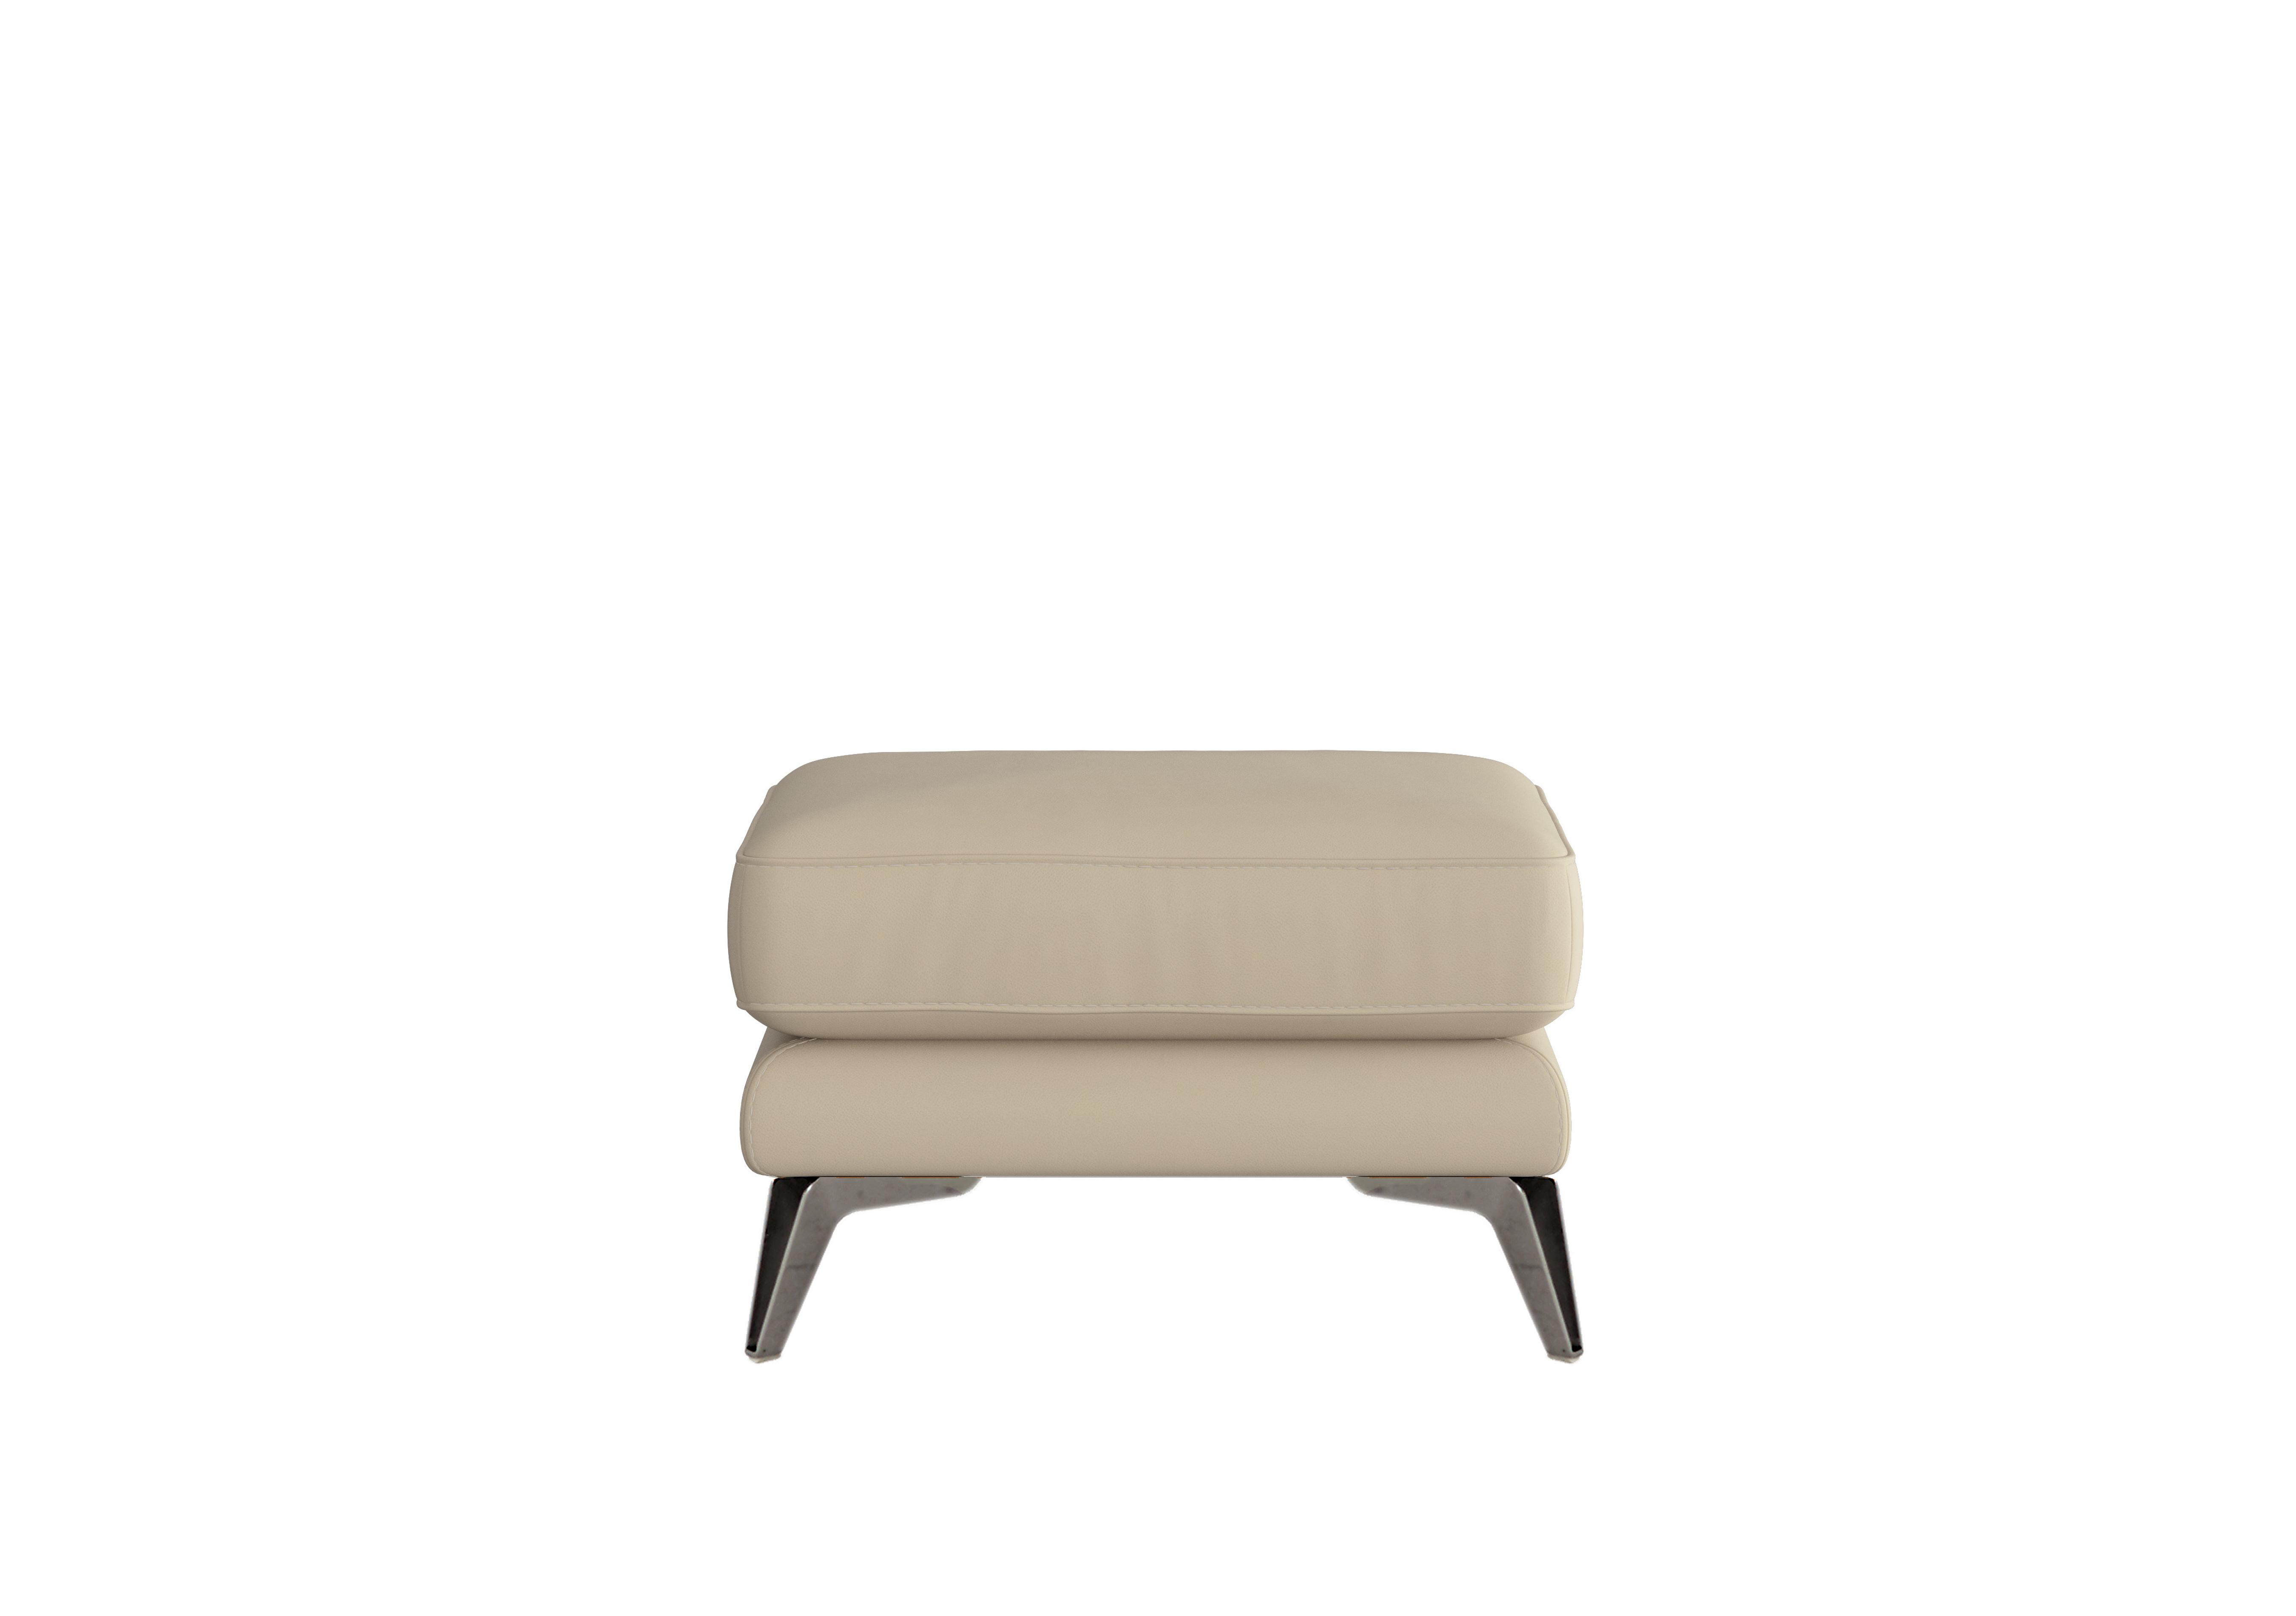 Contempo Leather Footstool in Bv-862c Bisque on Furniture Village